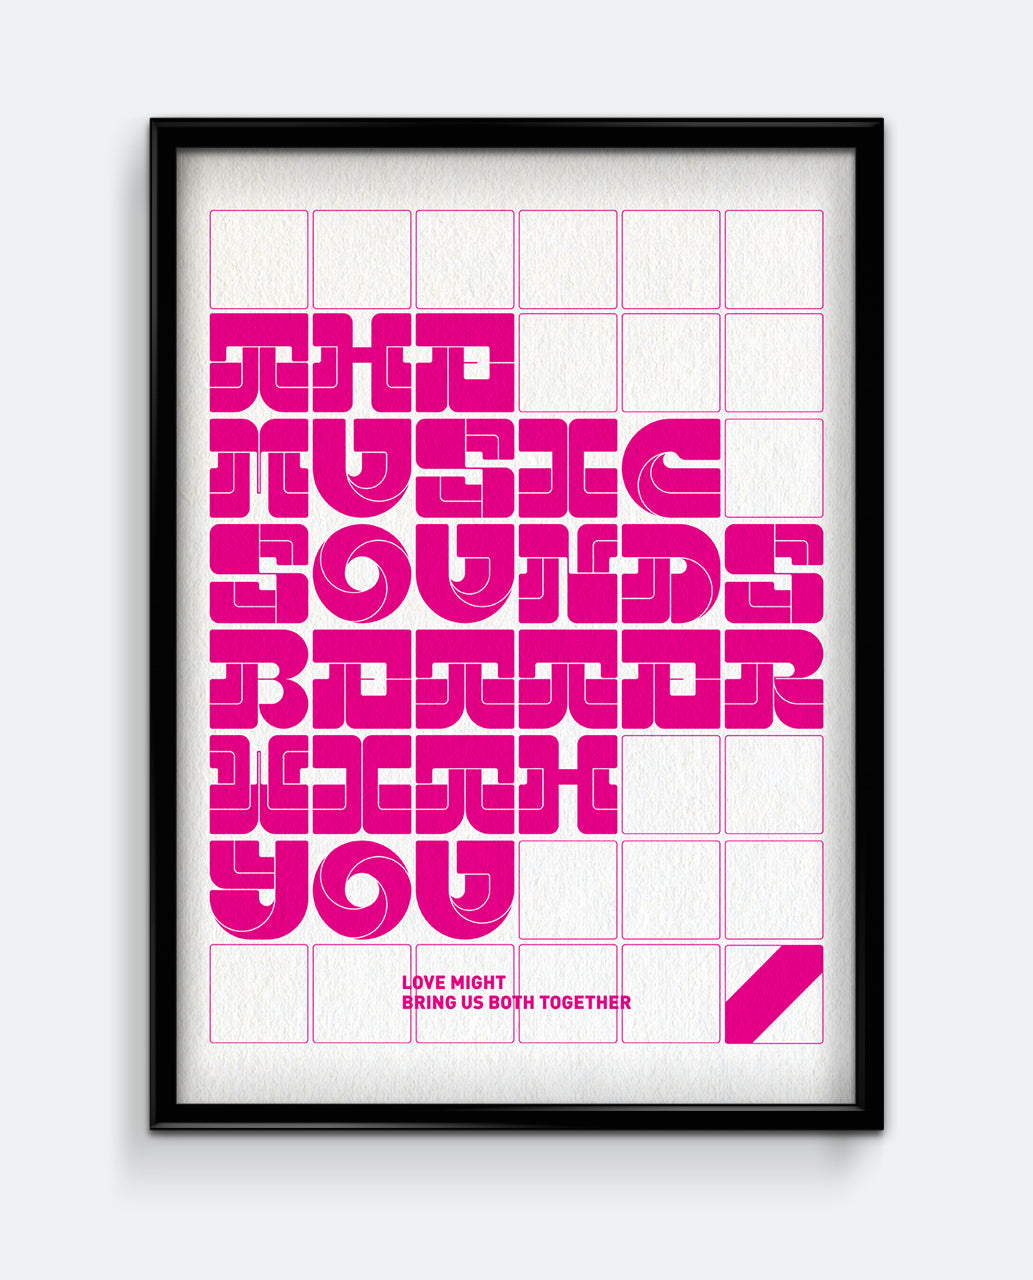 Music Sounds Better With You – Stardust Inspired Art Print